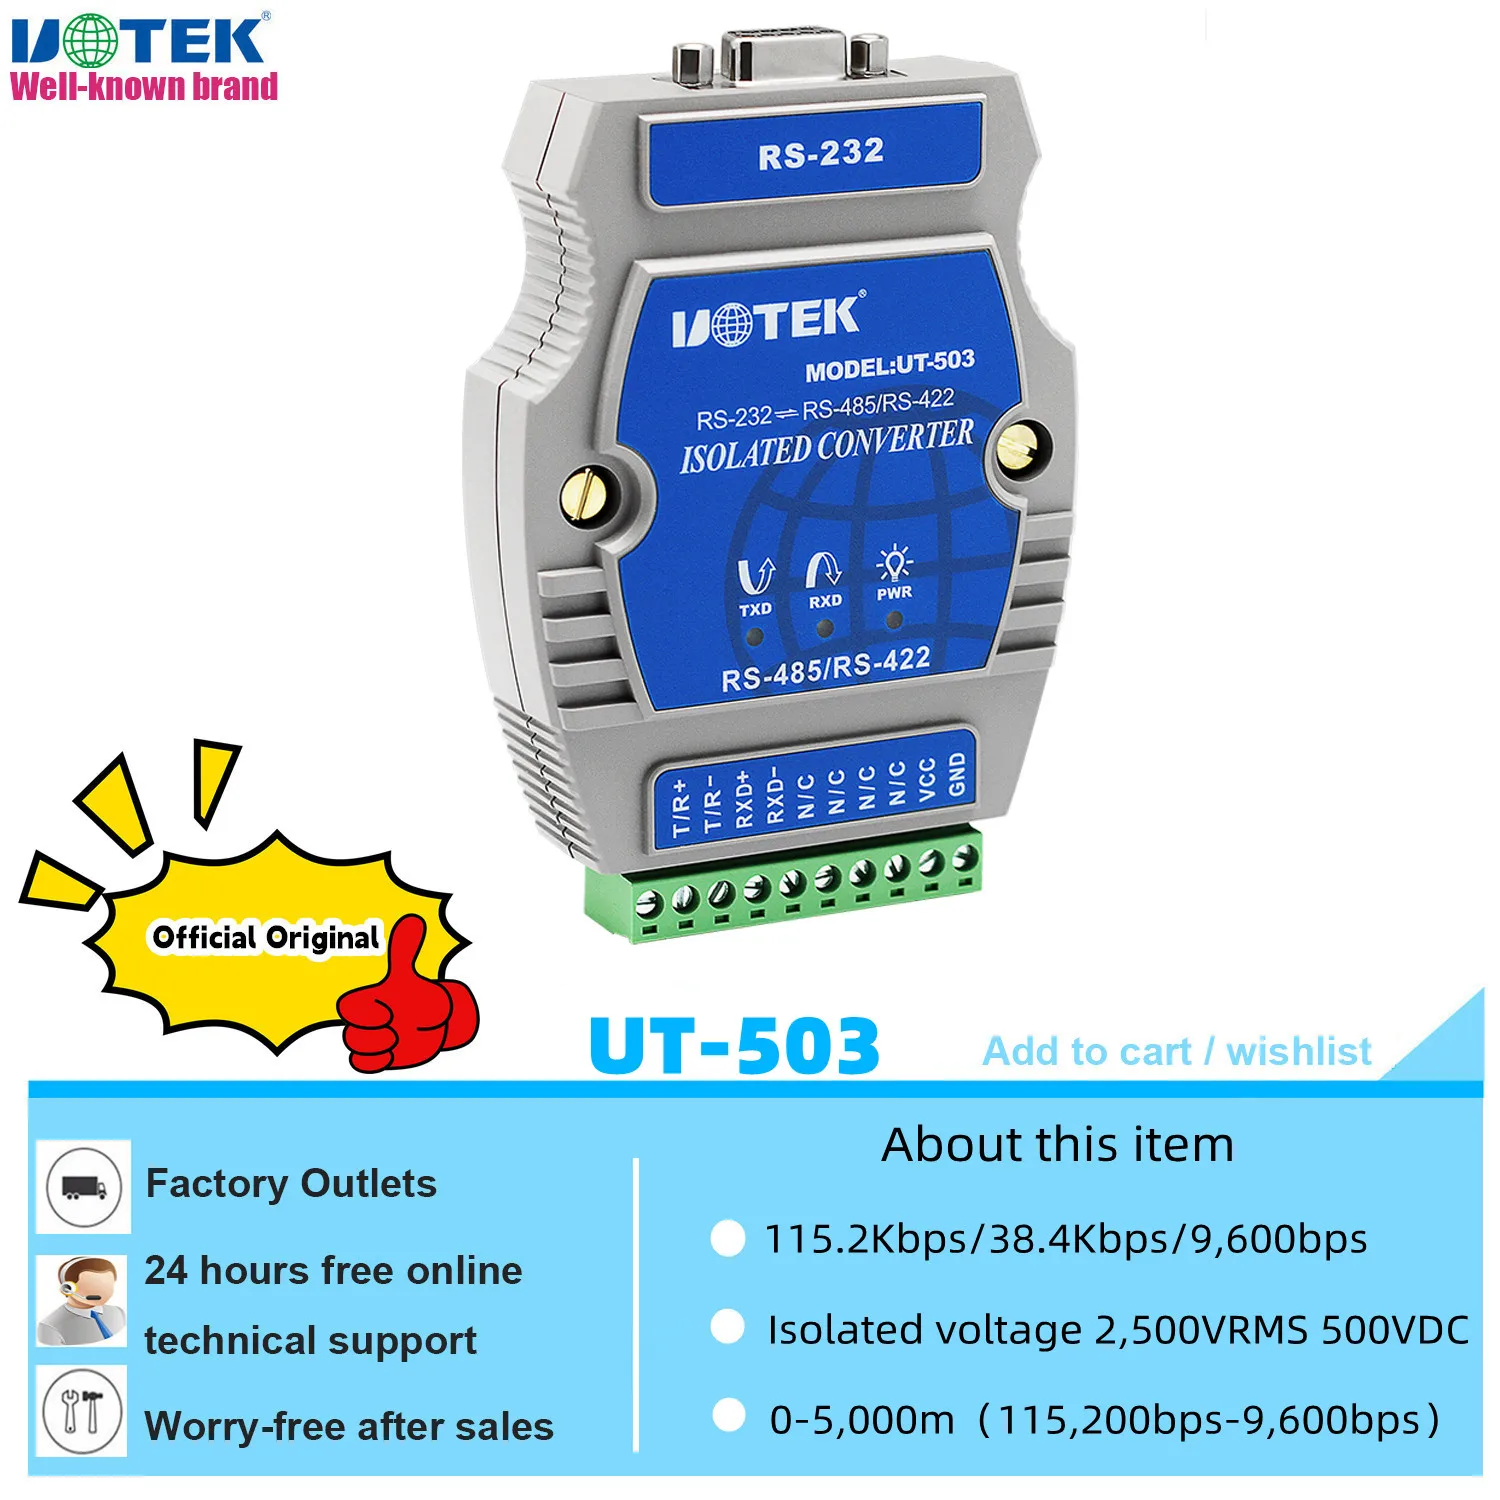 

UOTEK Industrial RS-232 to RS-485 RS-422 Converter DB9 RS232 to RS485 RS422 Adapter RS 232 485 422 Connector Isolation UT-503